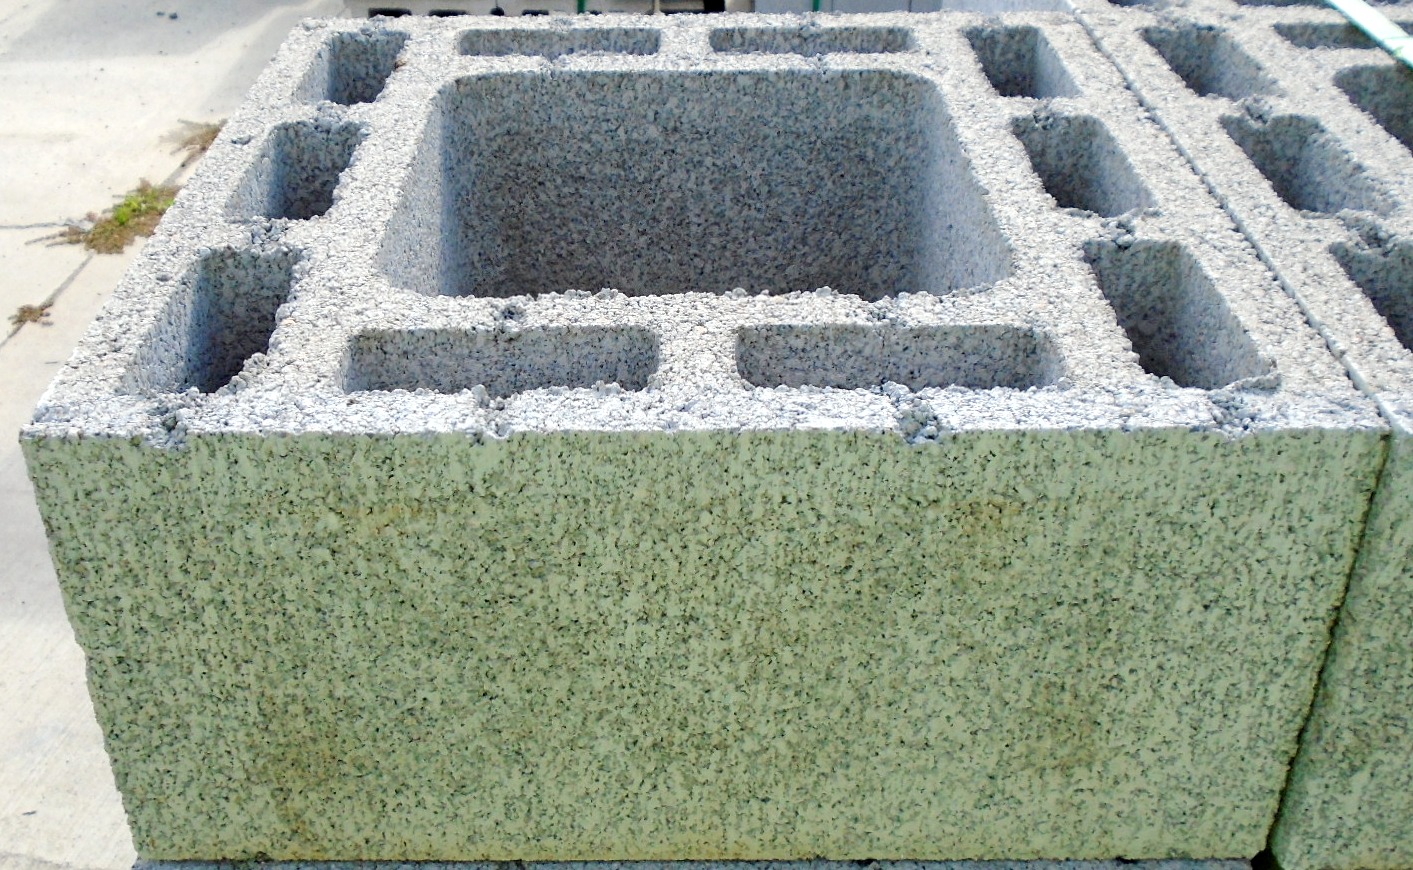 Chimney Block – Amcon Concrete Products